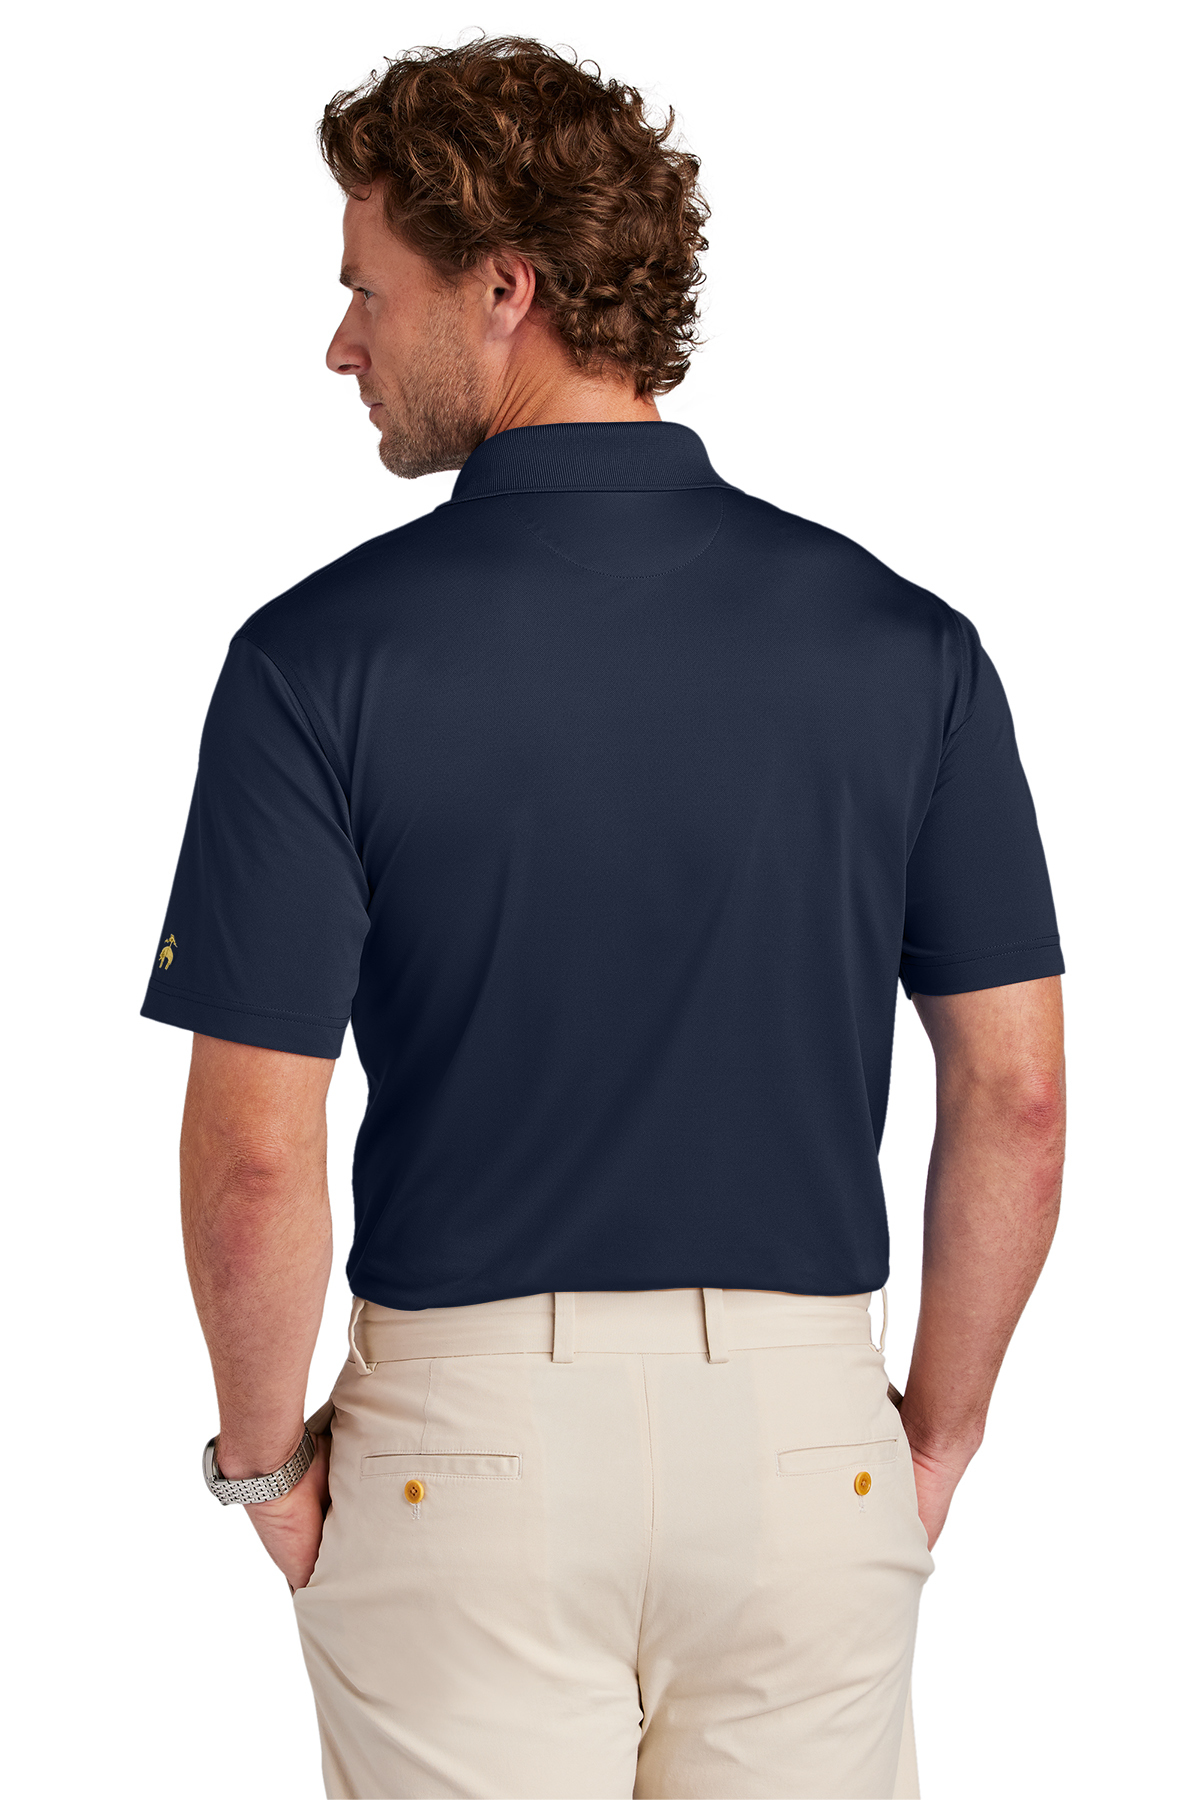 Brooks Brothers Mesh Pique Performance Polo | Product | SanMar